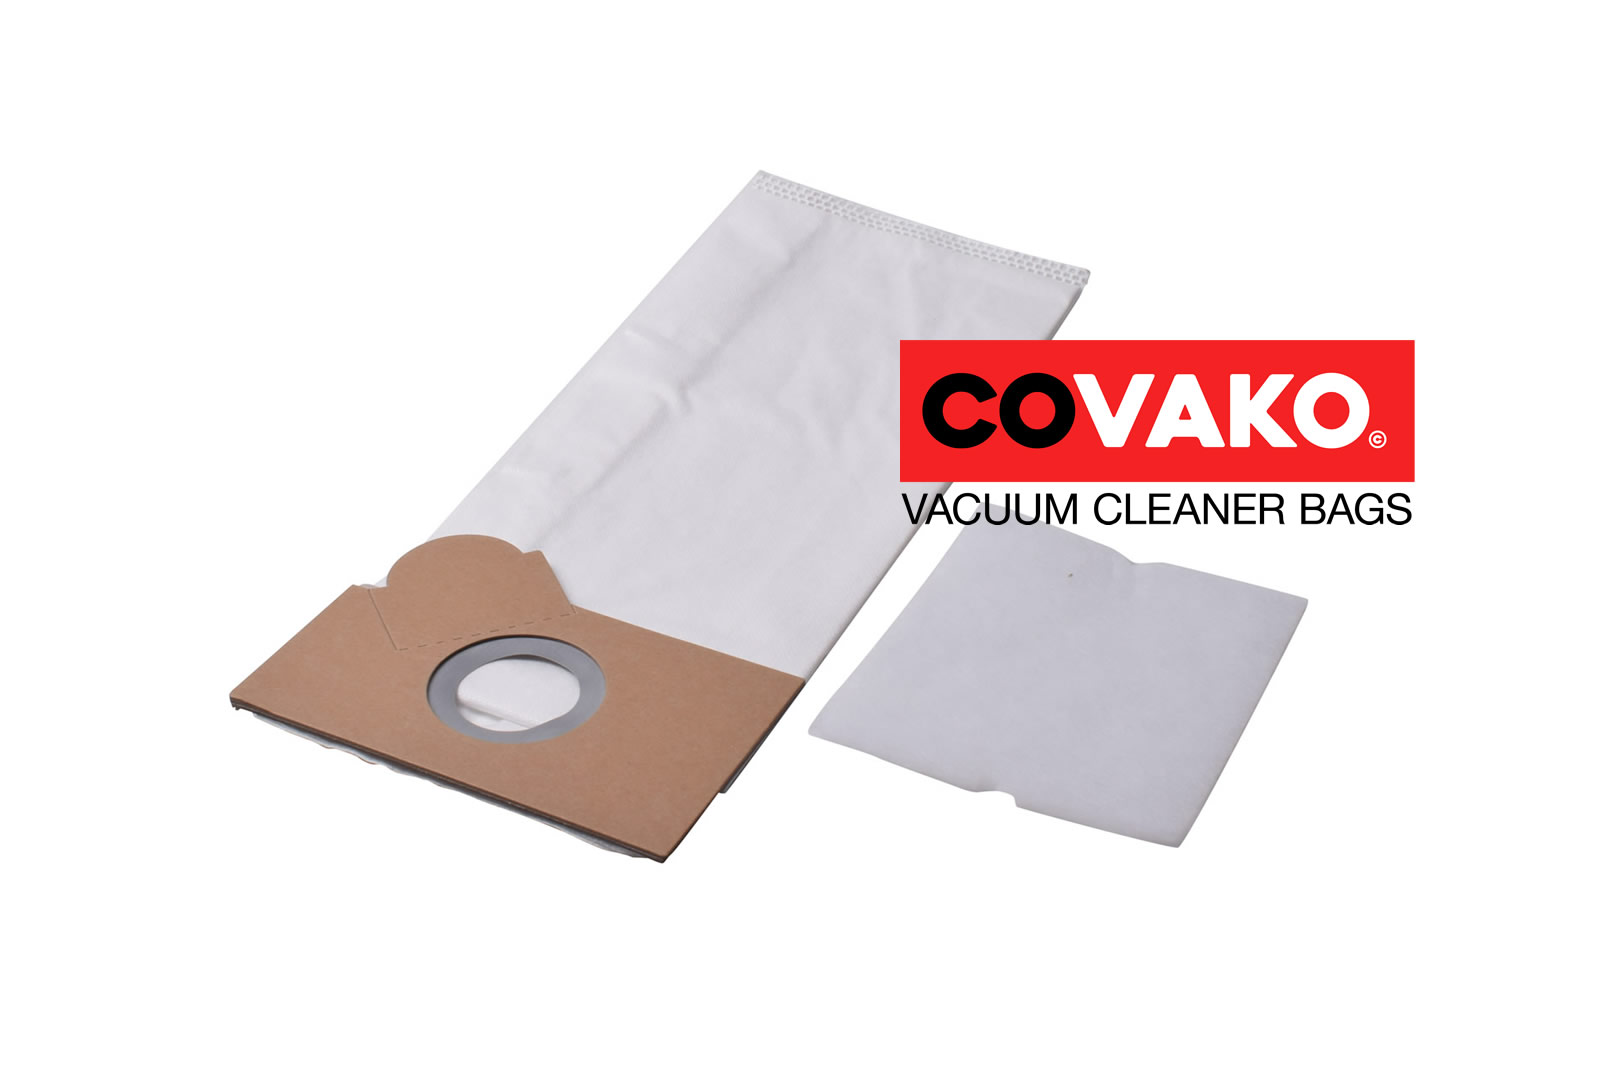 Fakir RS 17 / Synthesis - Fakir vacuum cleaner bags